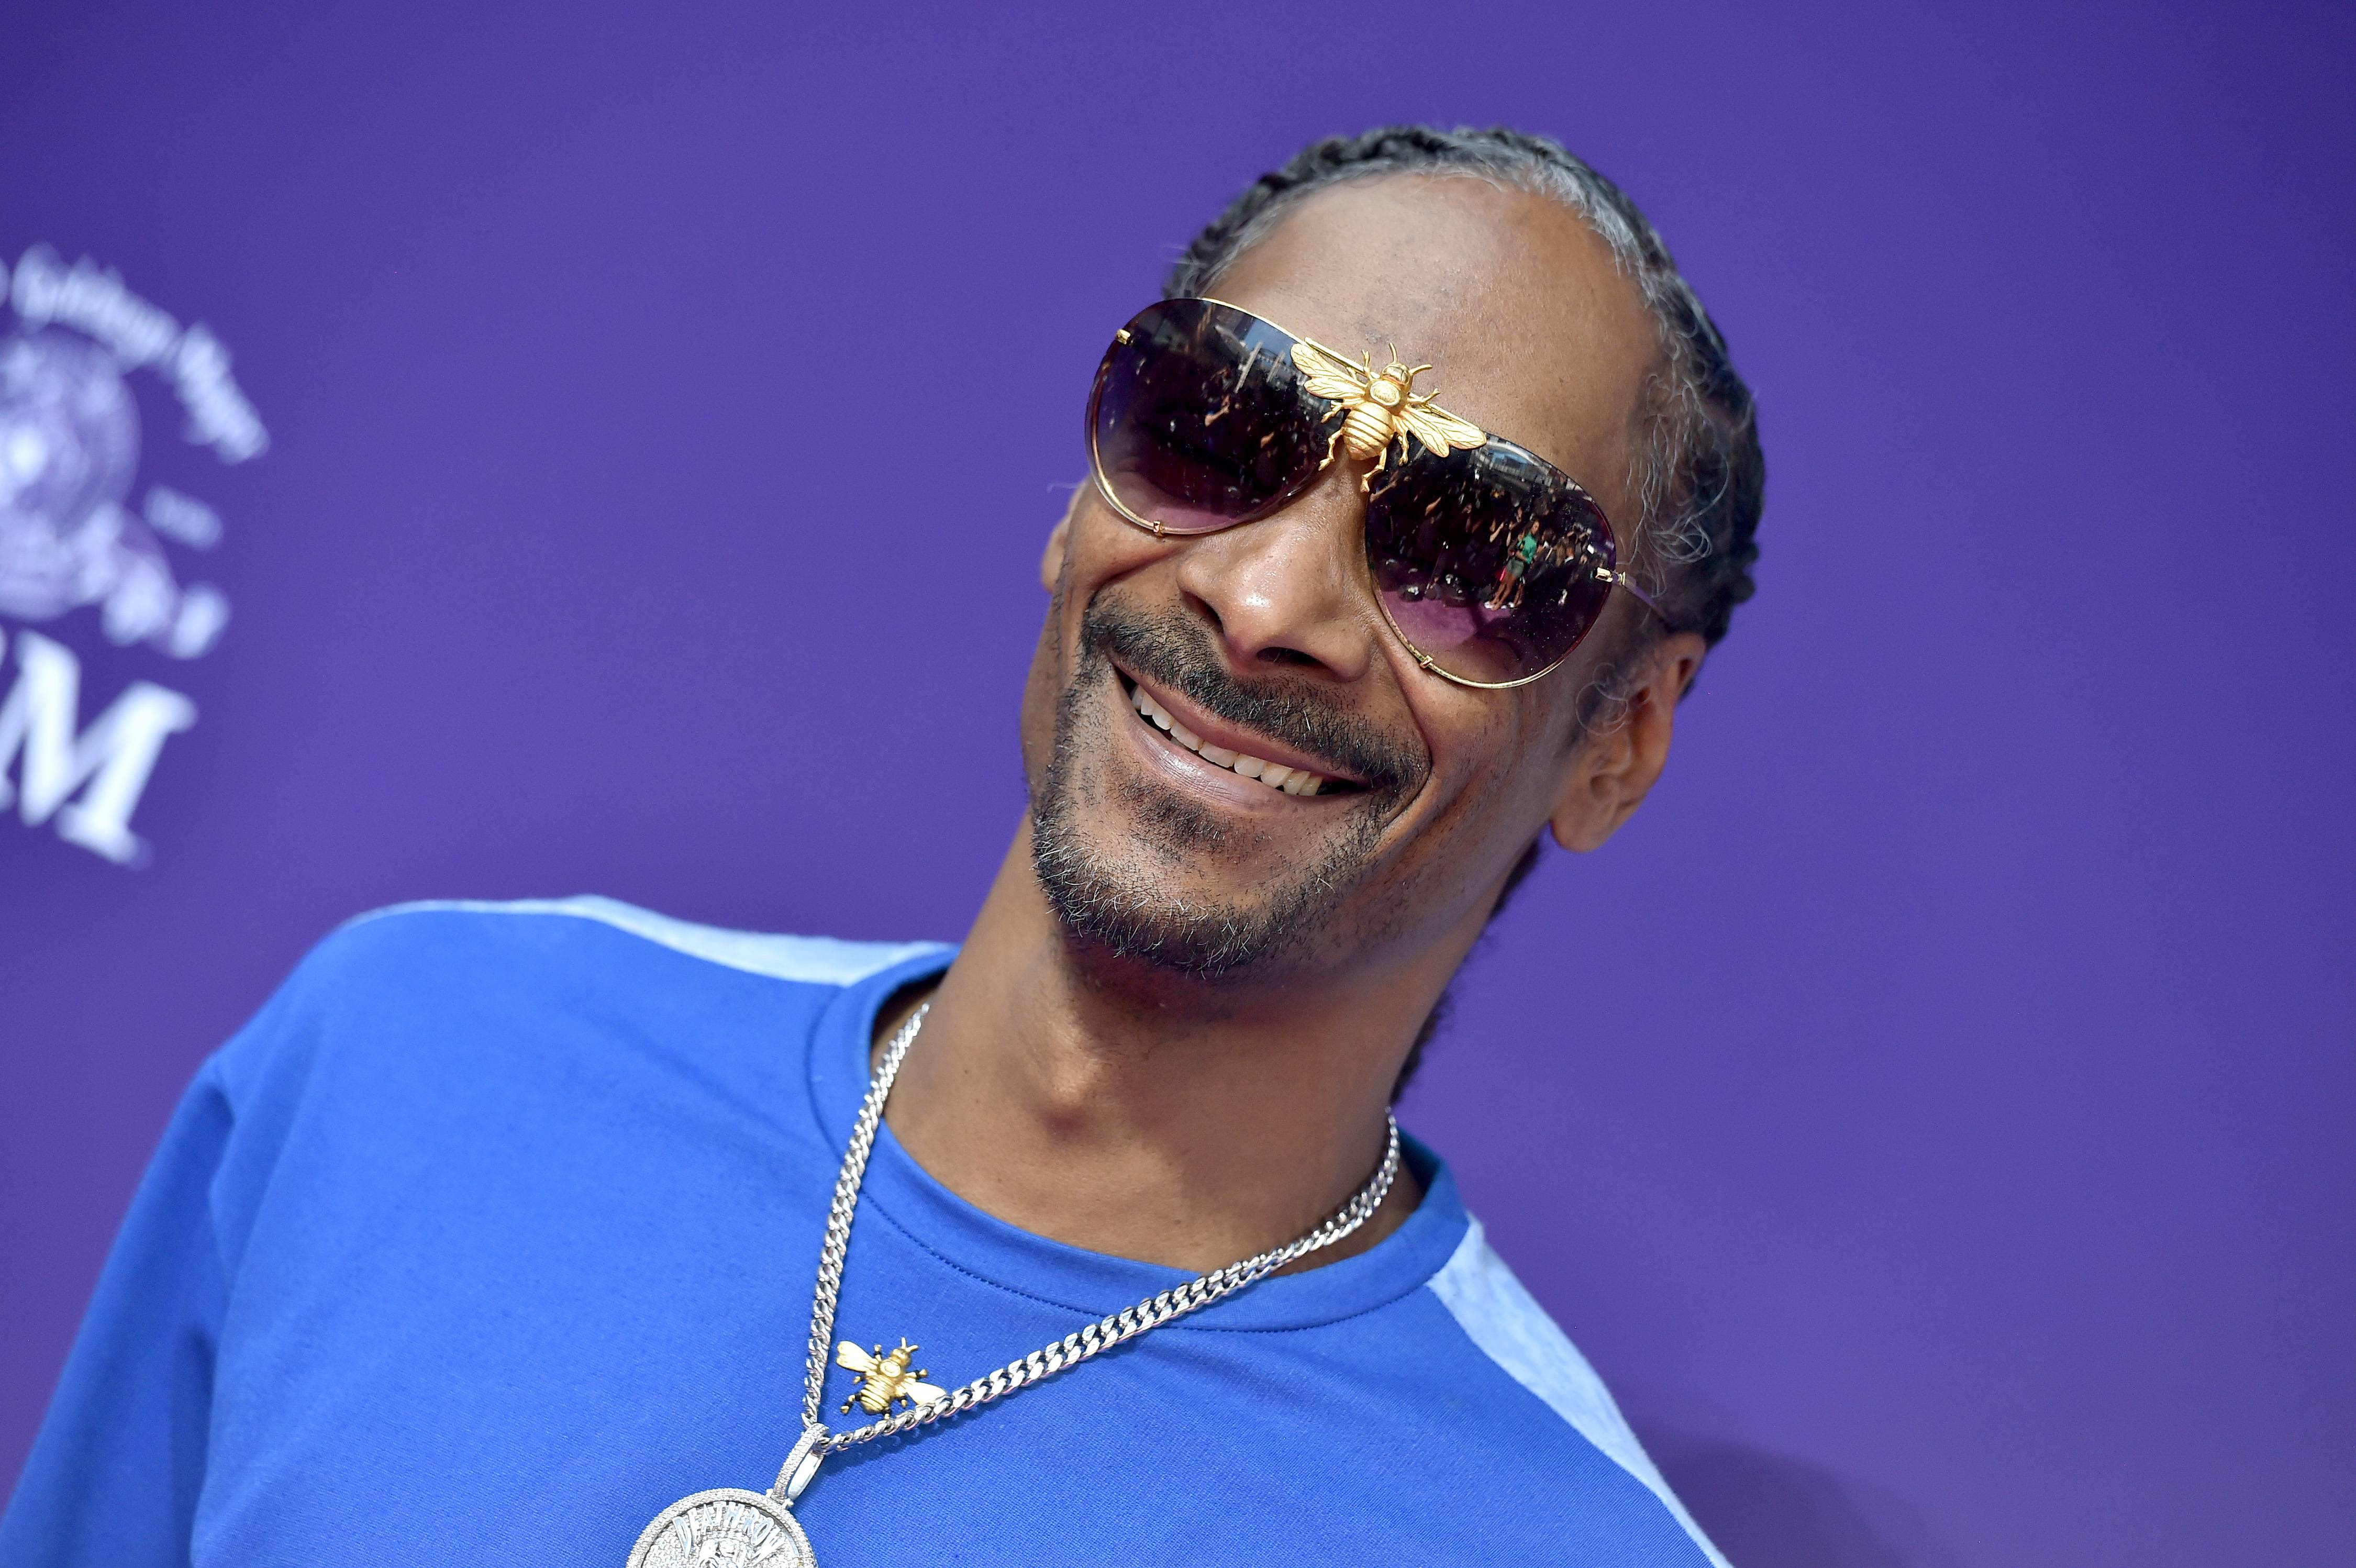 LOS ANGELES, CALIFORNIA - OCTOBER 06: Snoop Dogg attends the Premiere of MGM's "The Addams Family" at Westfield Century City AMC on October 06, 2019 in Los Angeles, California. (Photo by Axelle/Bauer-Griffin/FilmMagic)